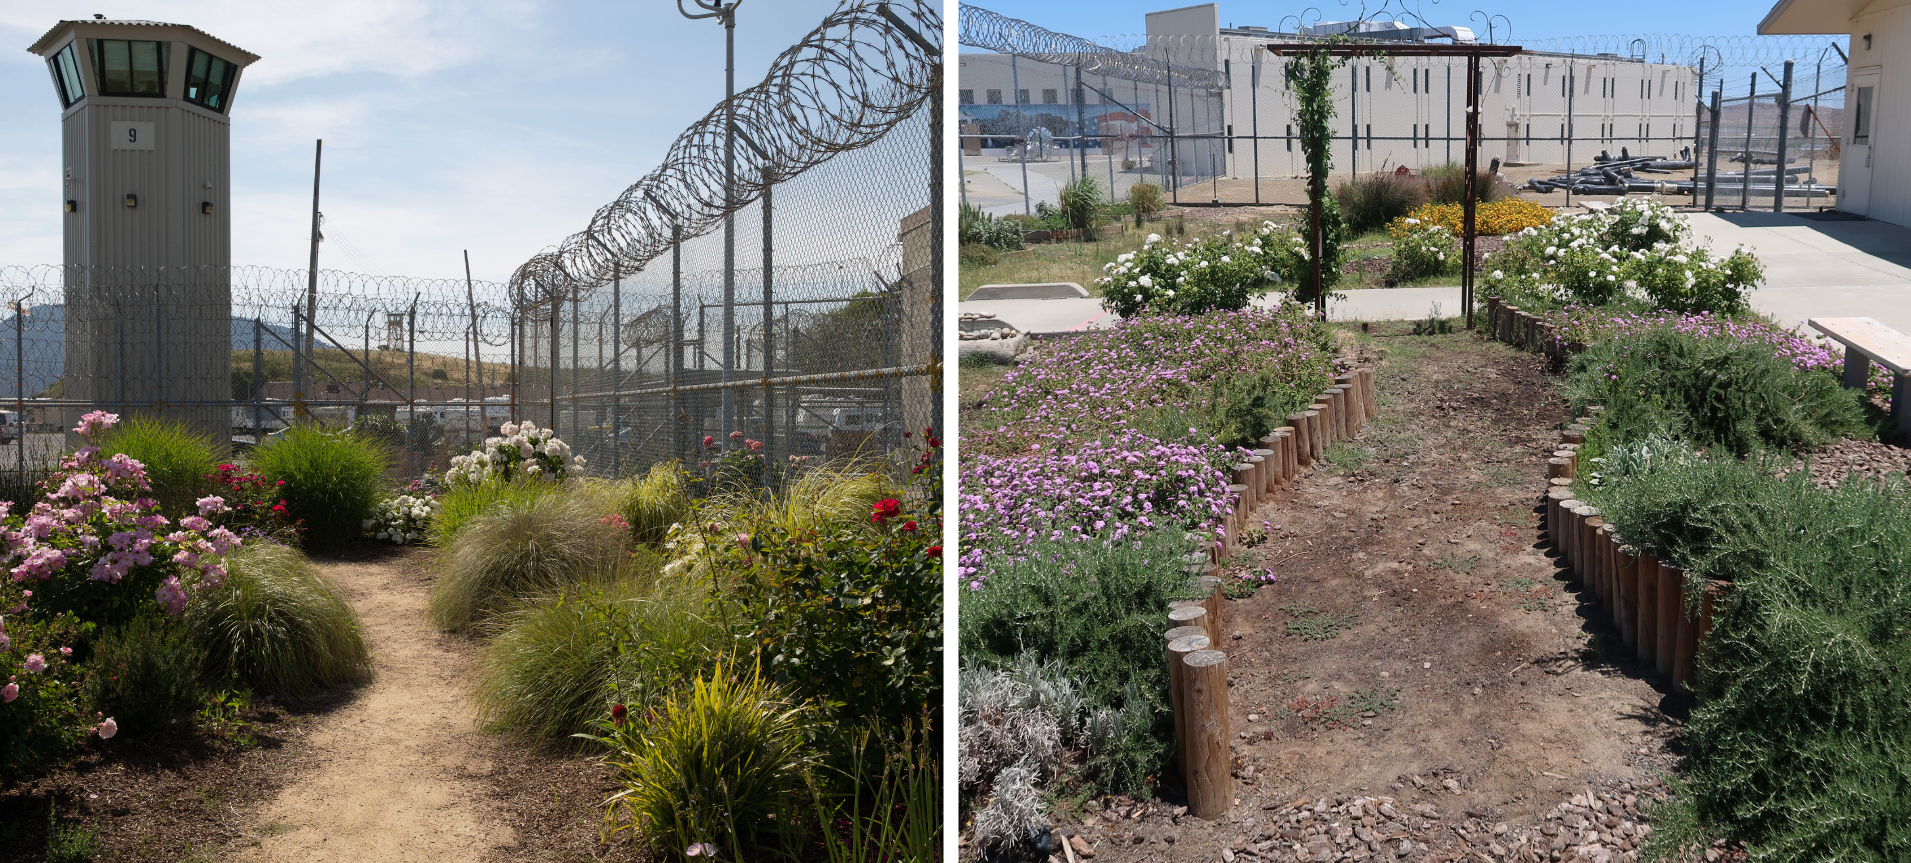 Two photos of Insight Garden Project gardens. On the left, is the garden at San Quentin, with blooming shrubs framing a dirt path. An observation tower stands behind the garden, which is surrounded by 10 foot chain-link fence topped with razor wire. On the right, is the garden at Avenal, with blooming shrubs framing a dirt path ending with a vine-covered archway. A cell block stands behind the garden, which is surrounded by 10 foot chain-link fence topped with razor wire.